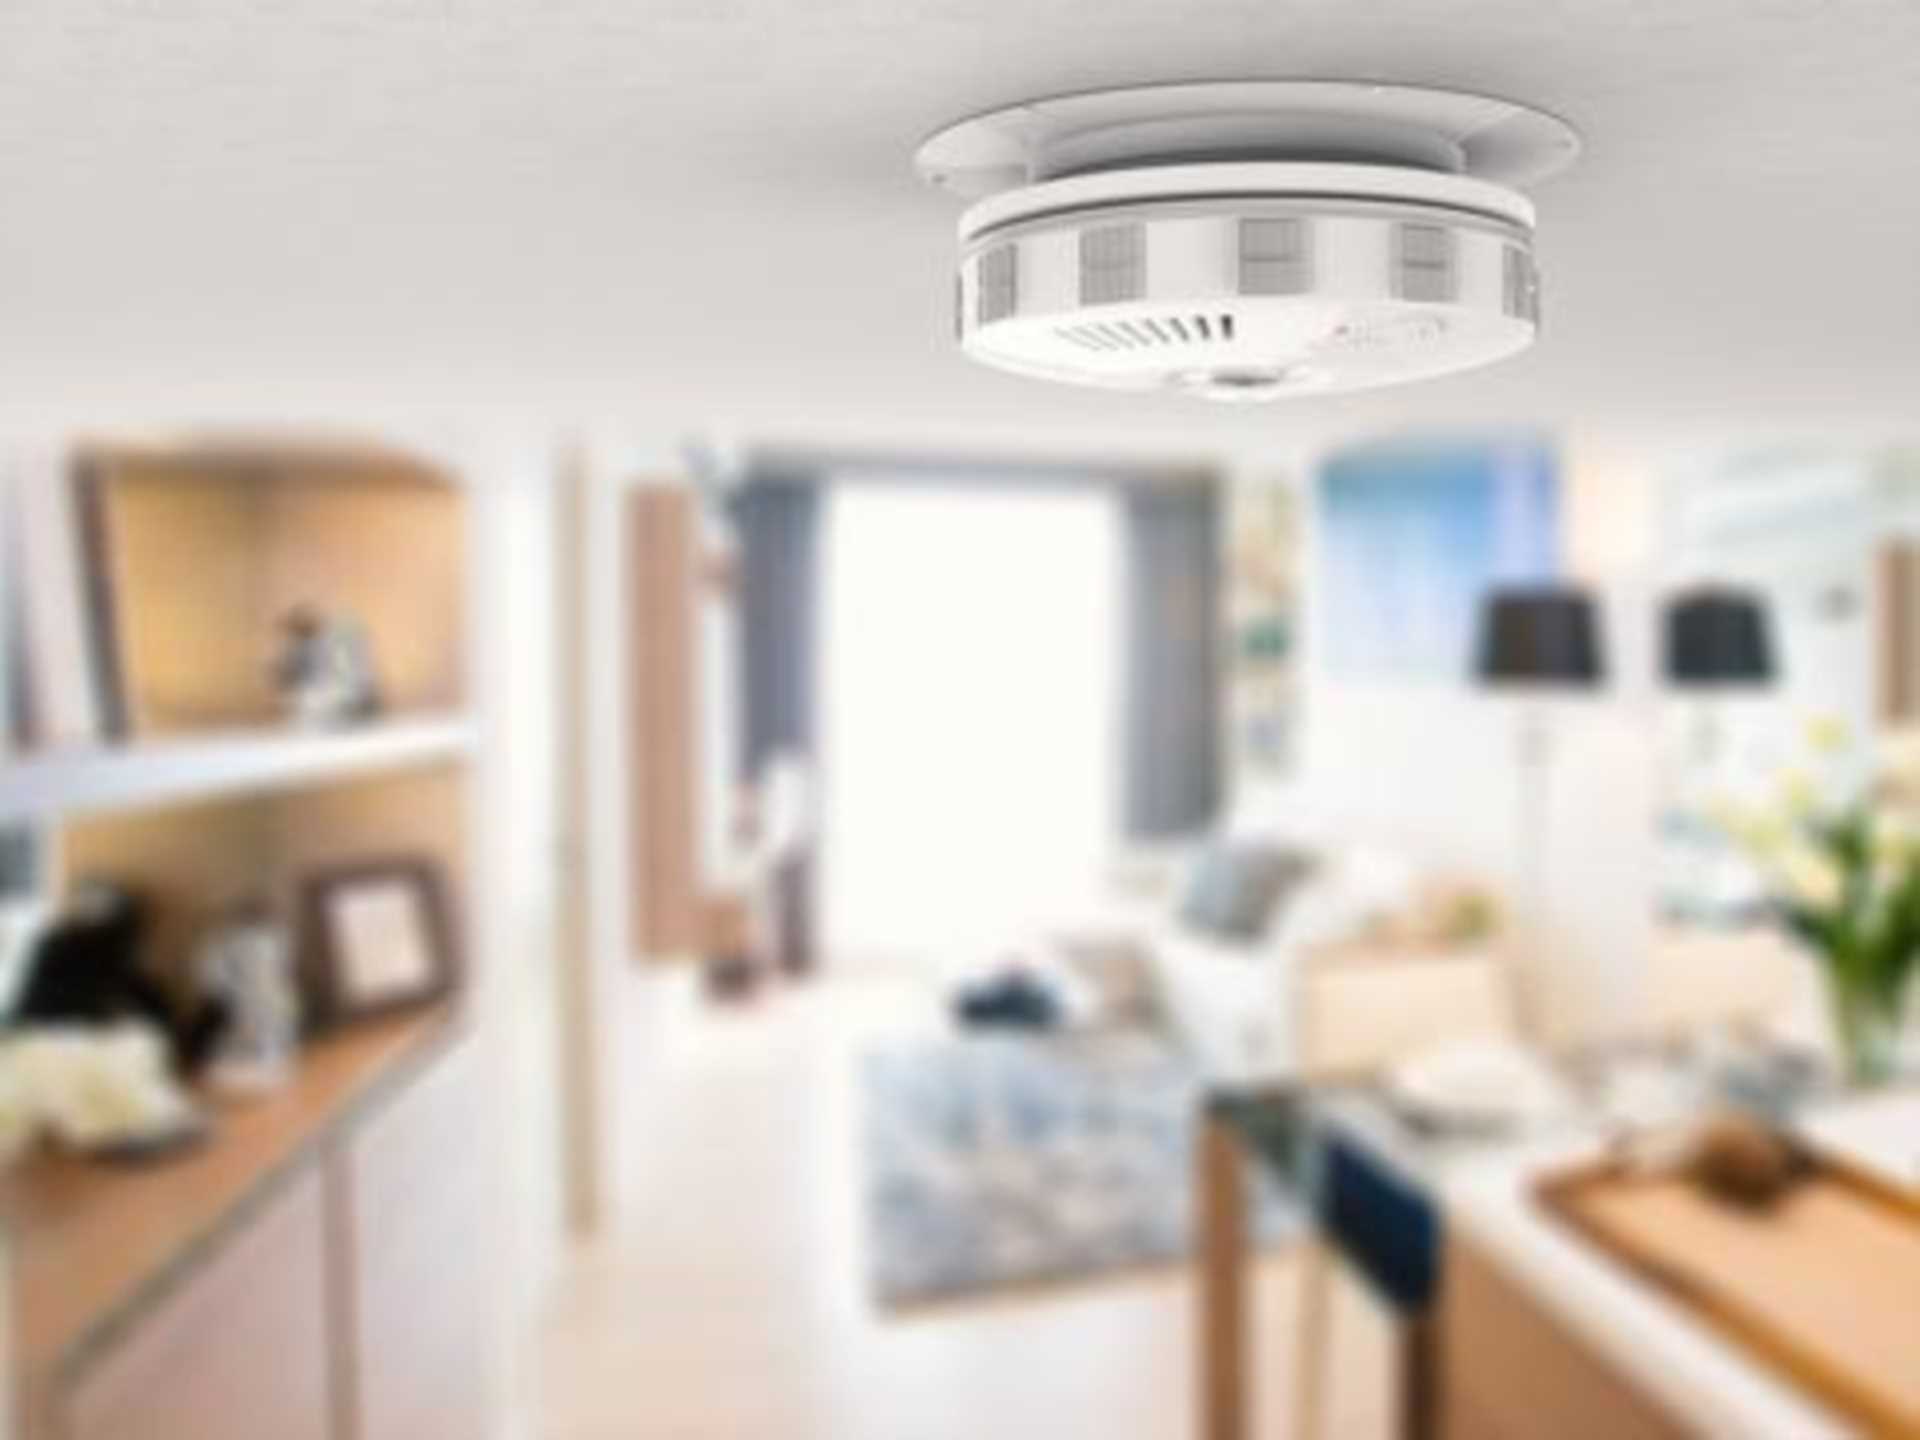 Smoke and carbon monoxide alarms compulsory from 1 October